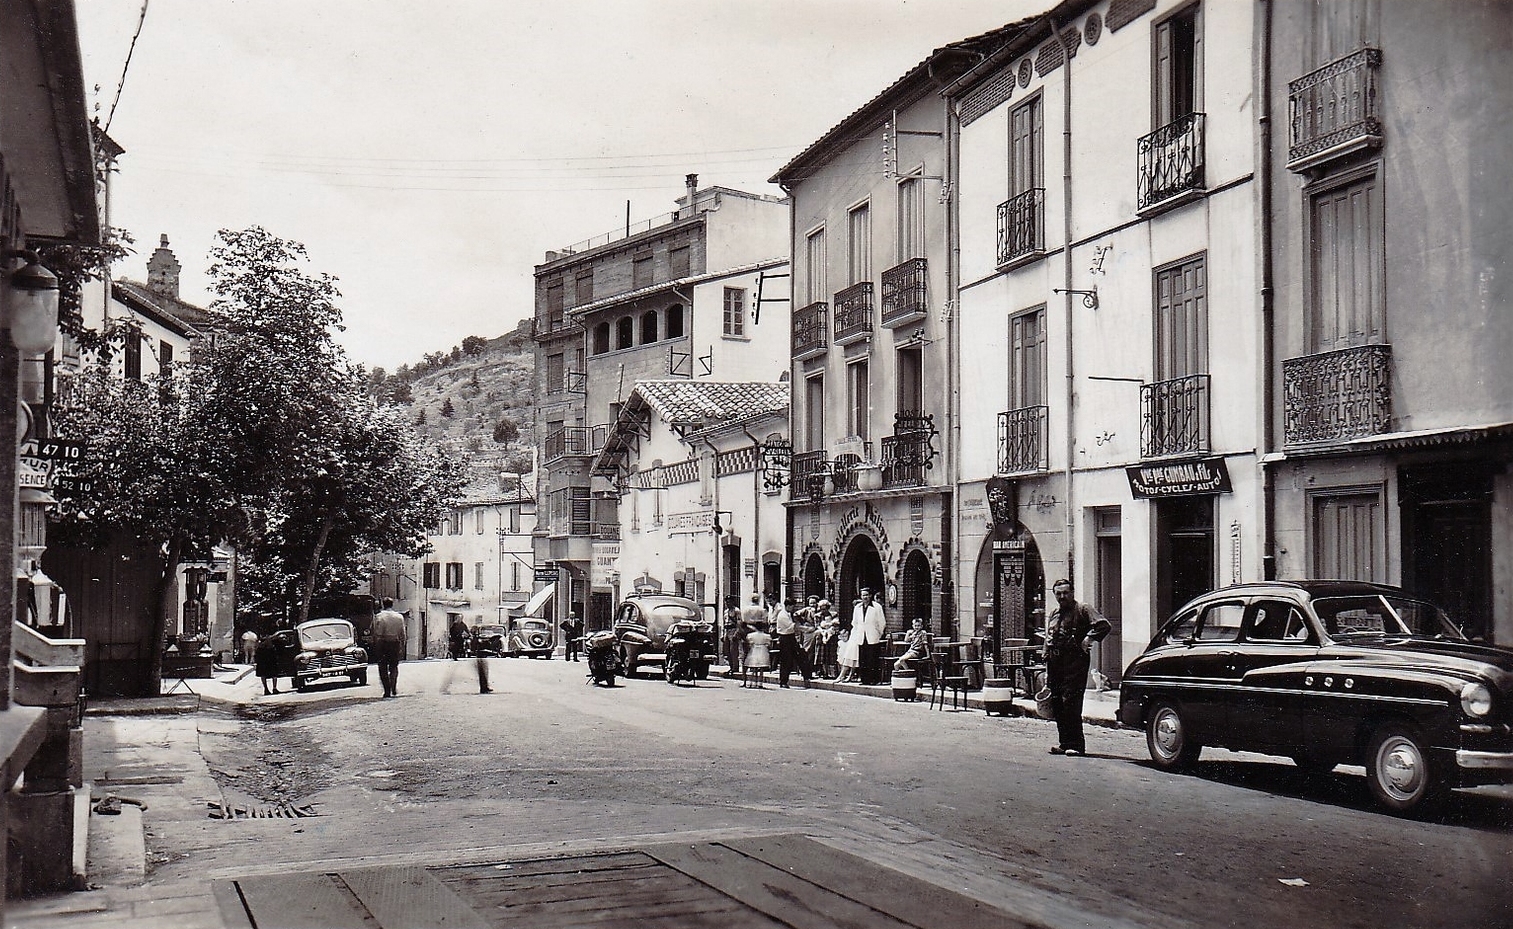 The French customs office at Le Perthus around 1953 (the lower white building on the right) [4]